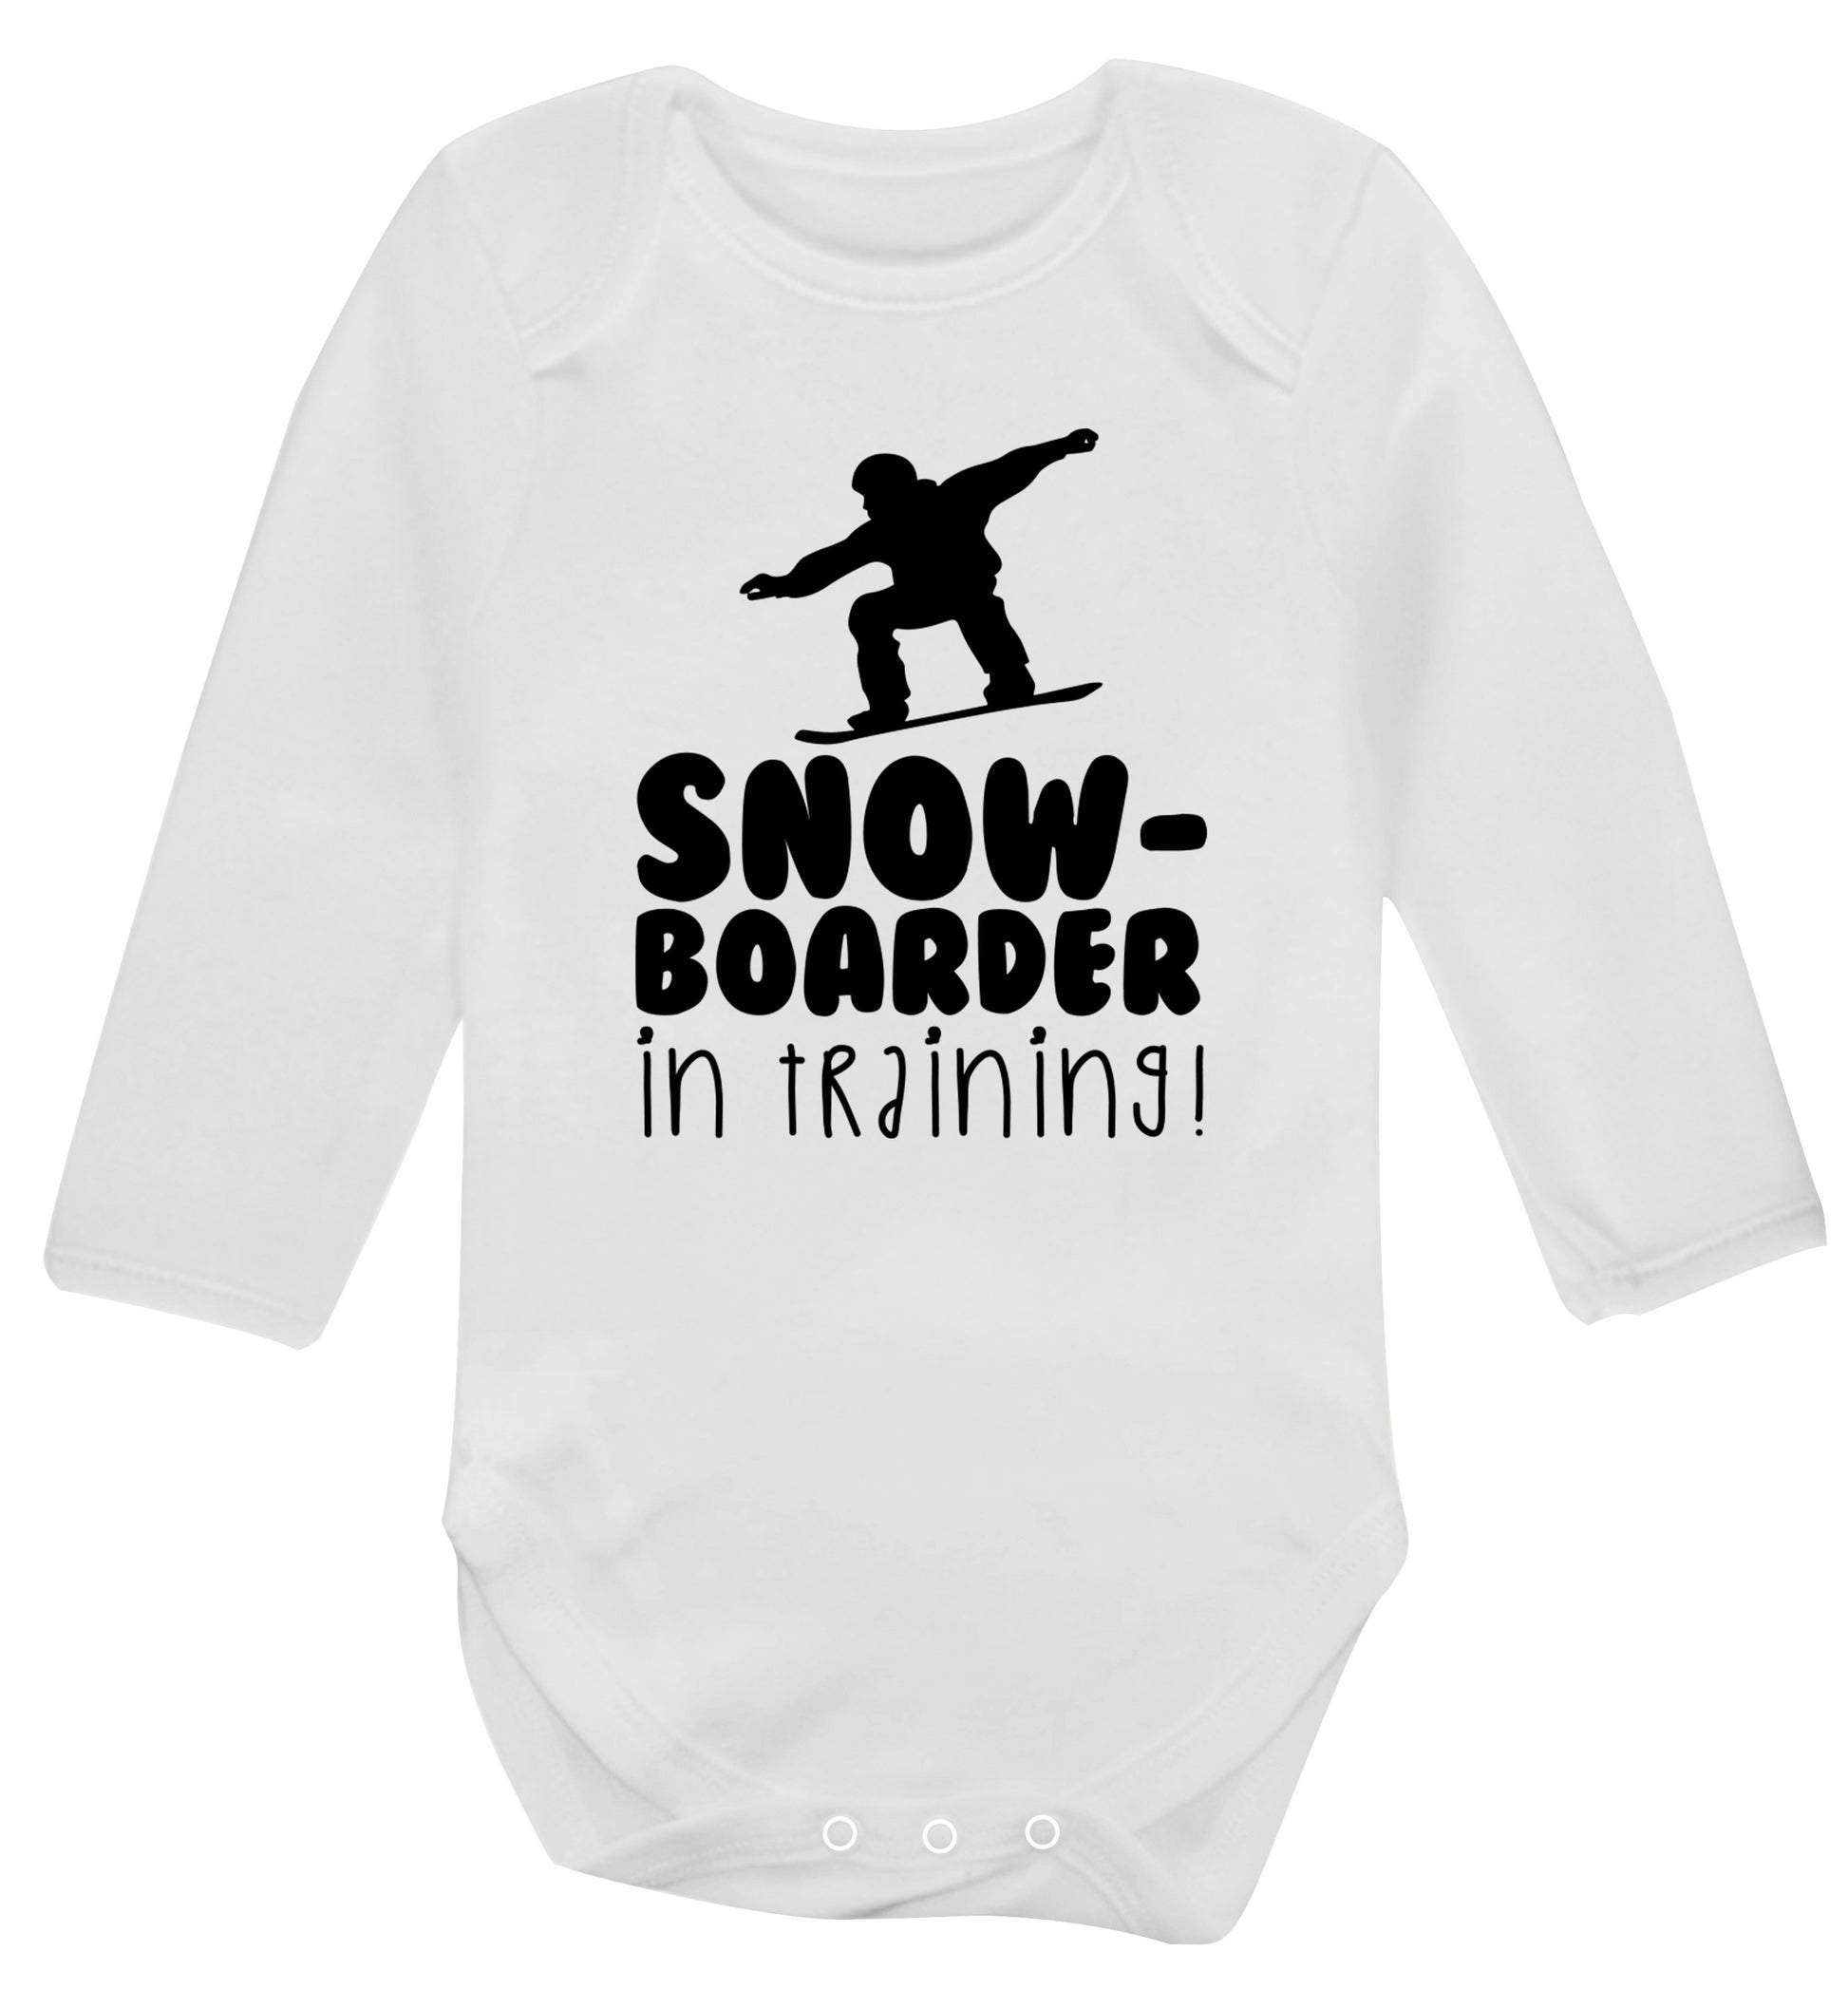 Snowboarder in training Baby Vest long sleeved white 6-12 months